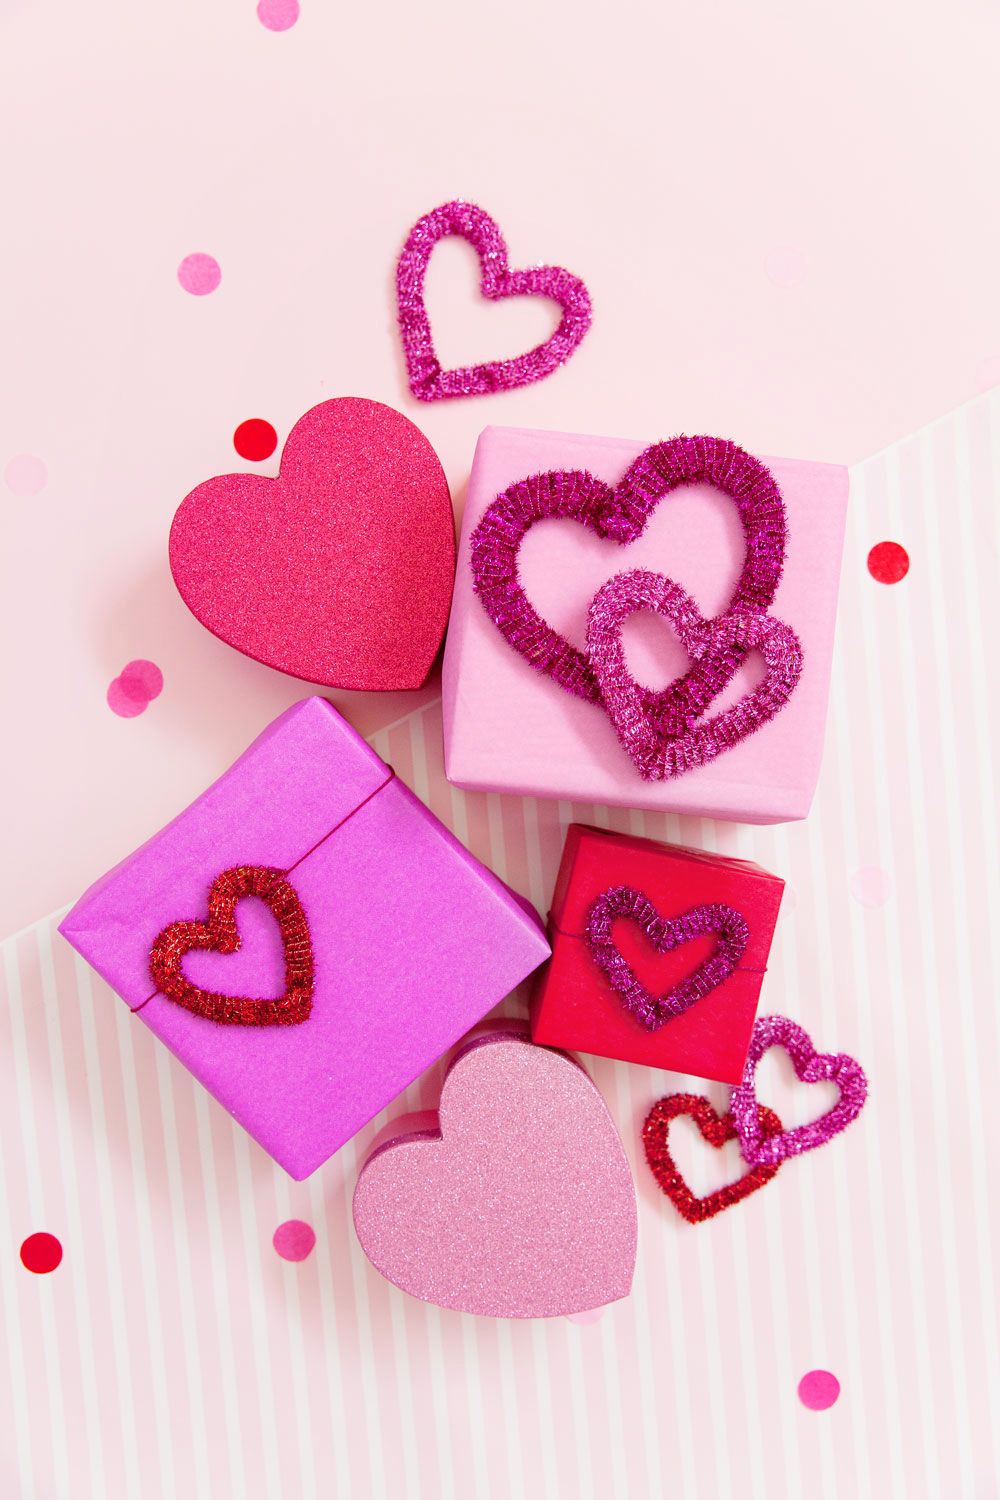 60 Adorable Valentines Day Crafts That are Simple and Fun 2022 pic